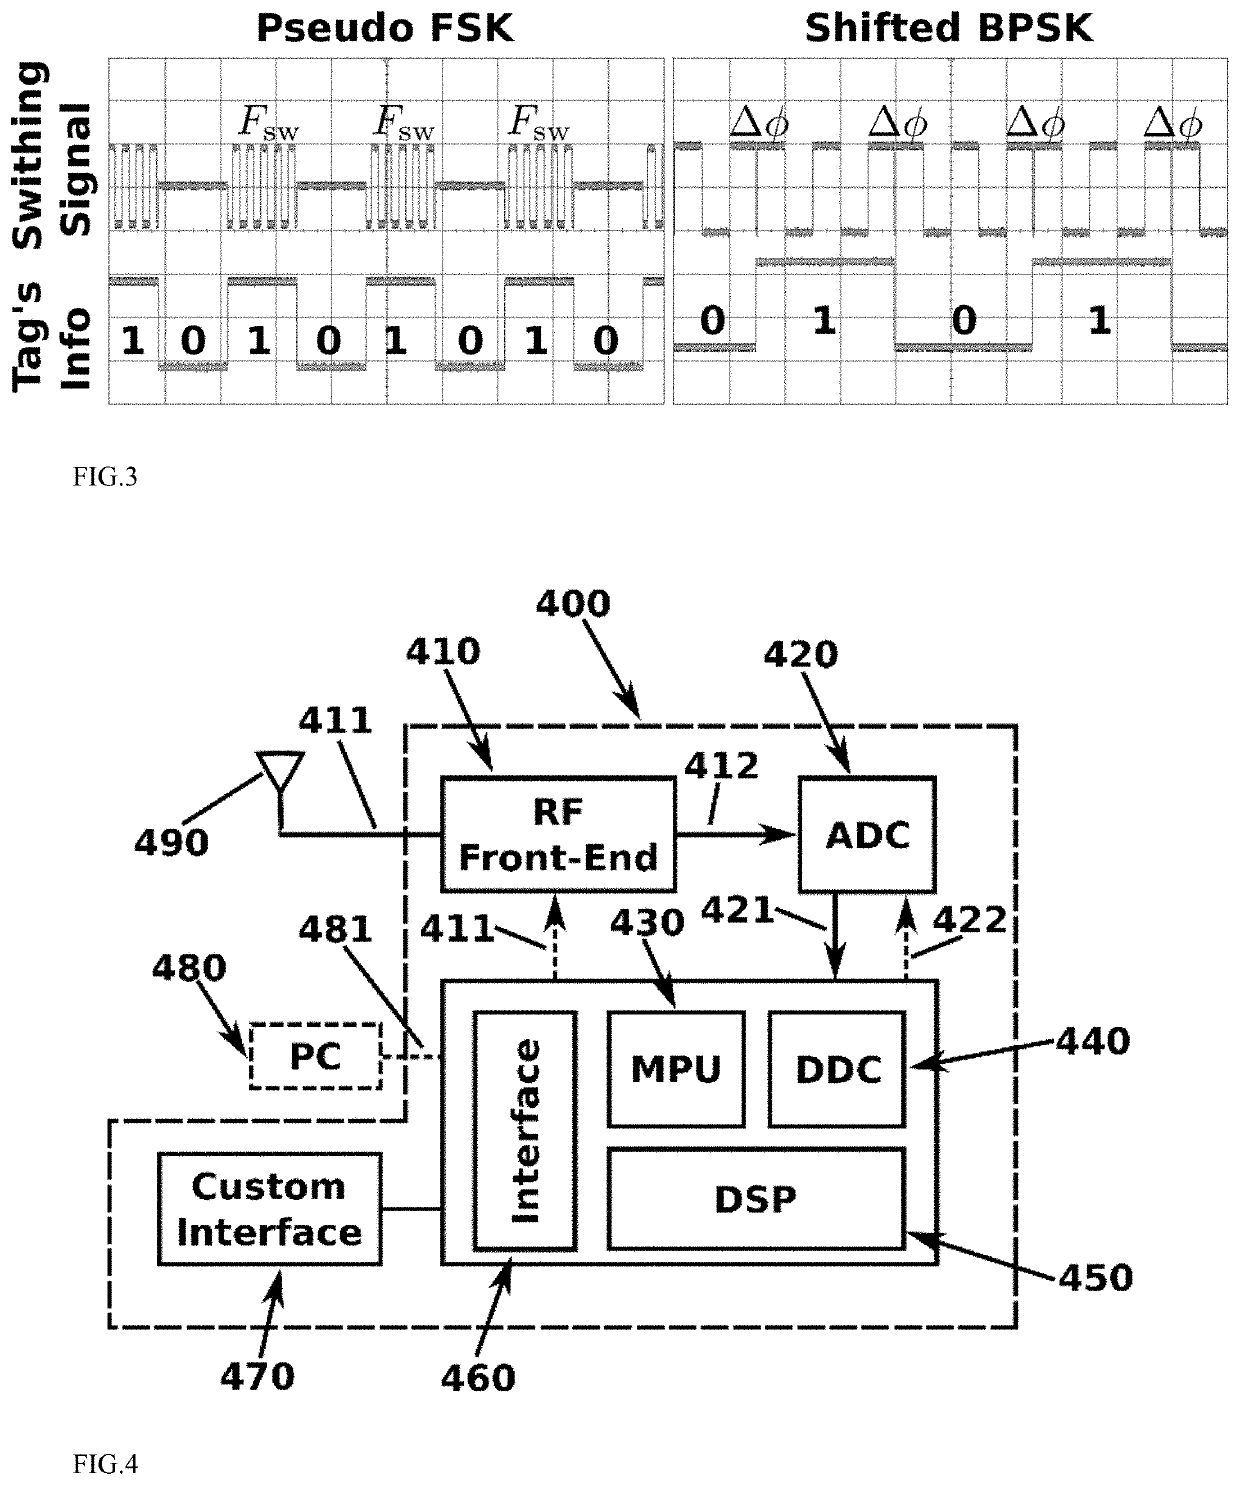 Switching frequency methods and apparatus for ambient backscatter networking and jamming